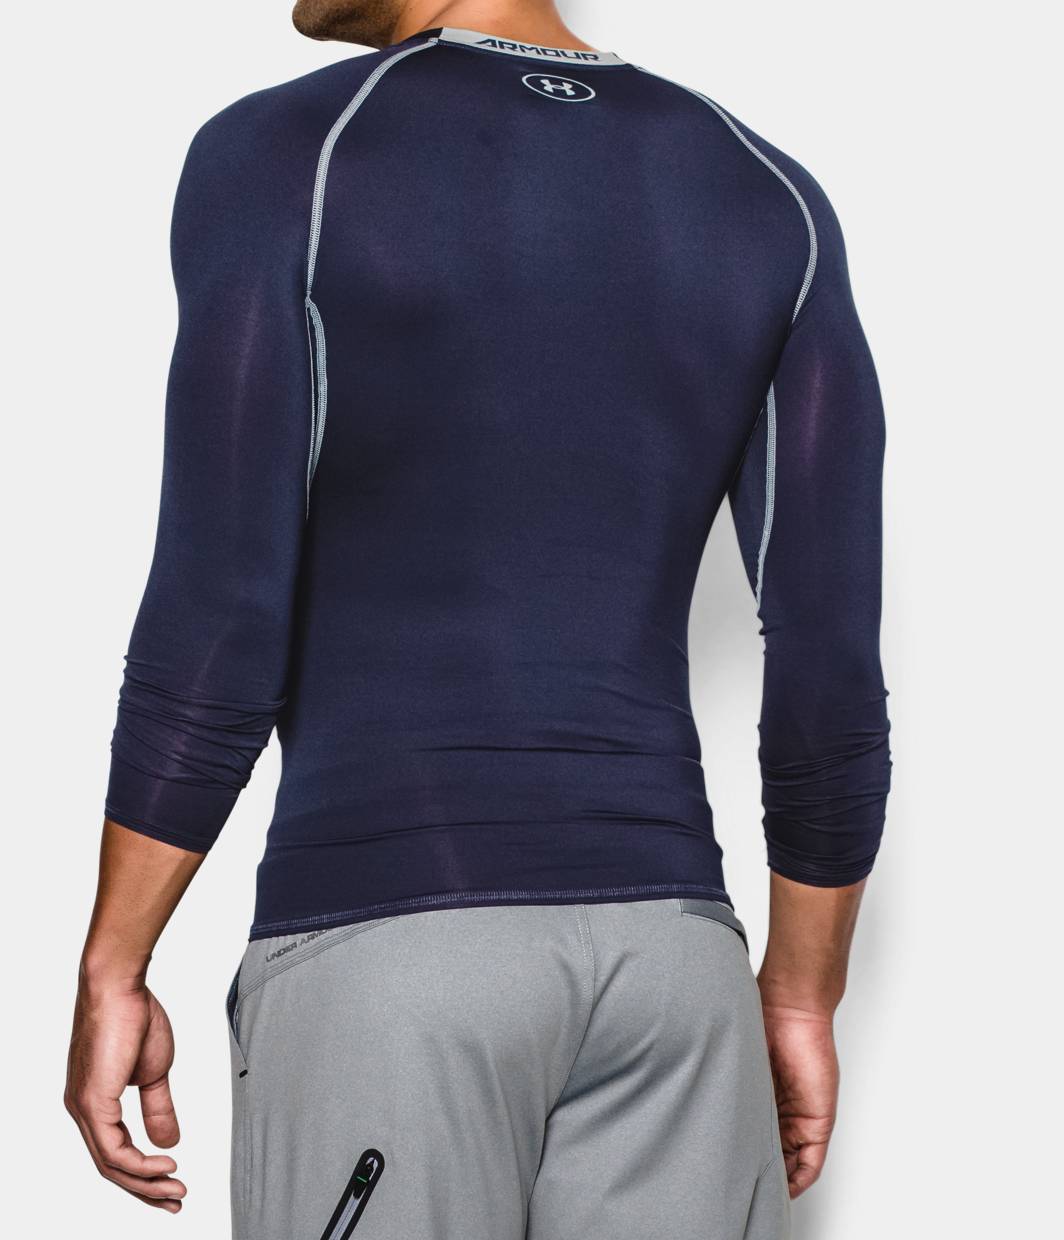 Under Armour Men's HeatGear Armour Long Sleeve Compression Shirt 1257471-410 Midnight Navy - image 3 of 4